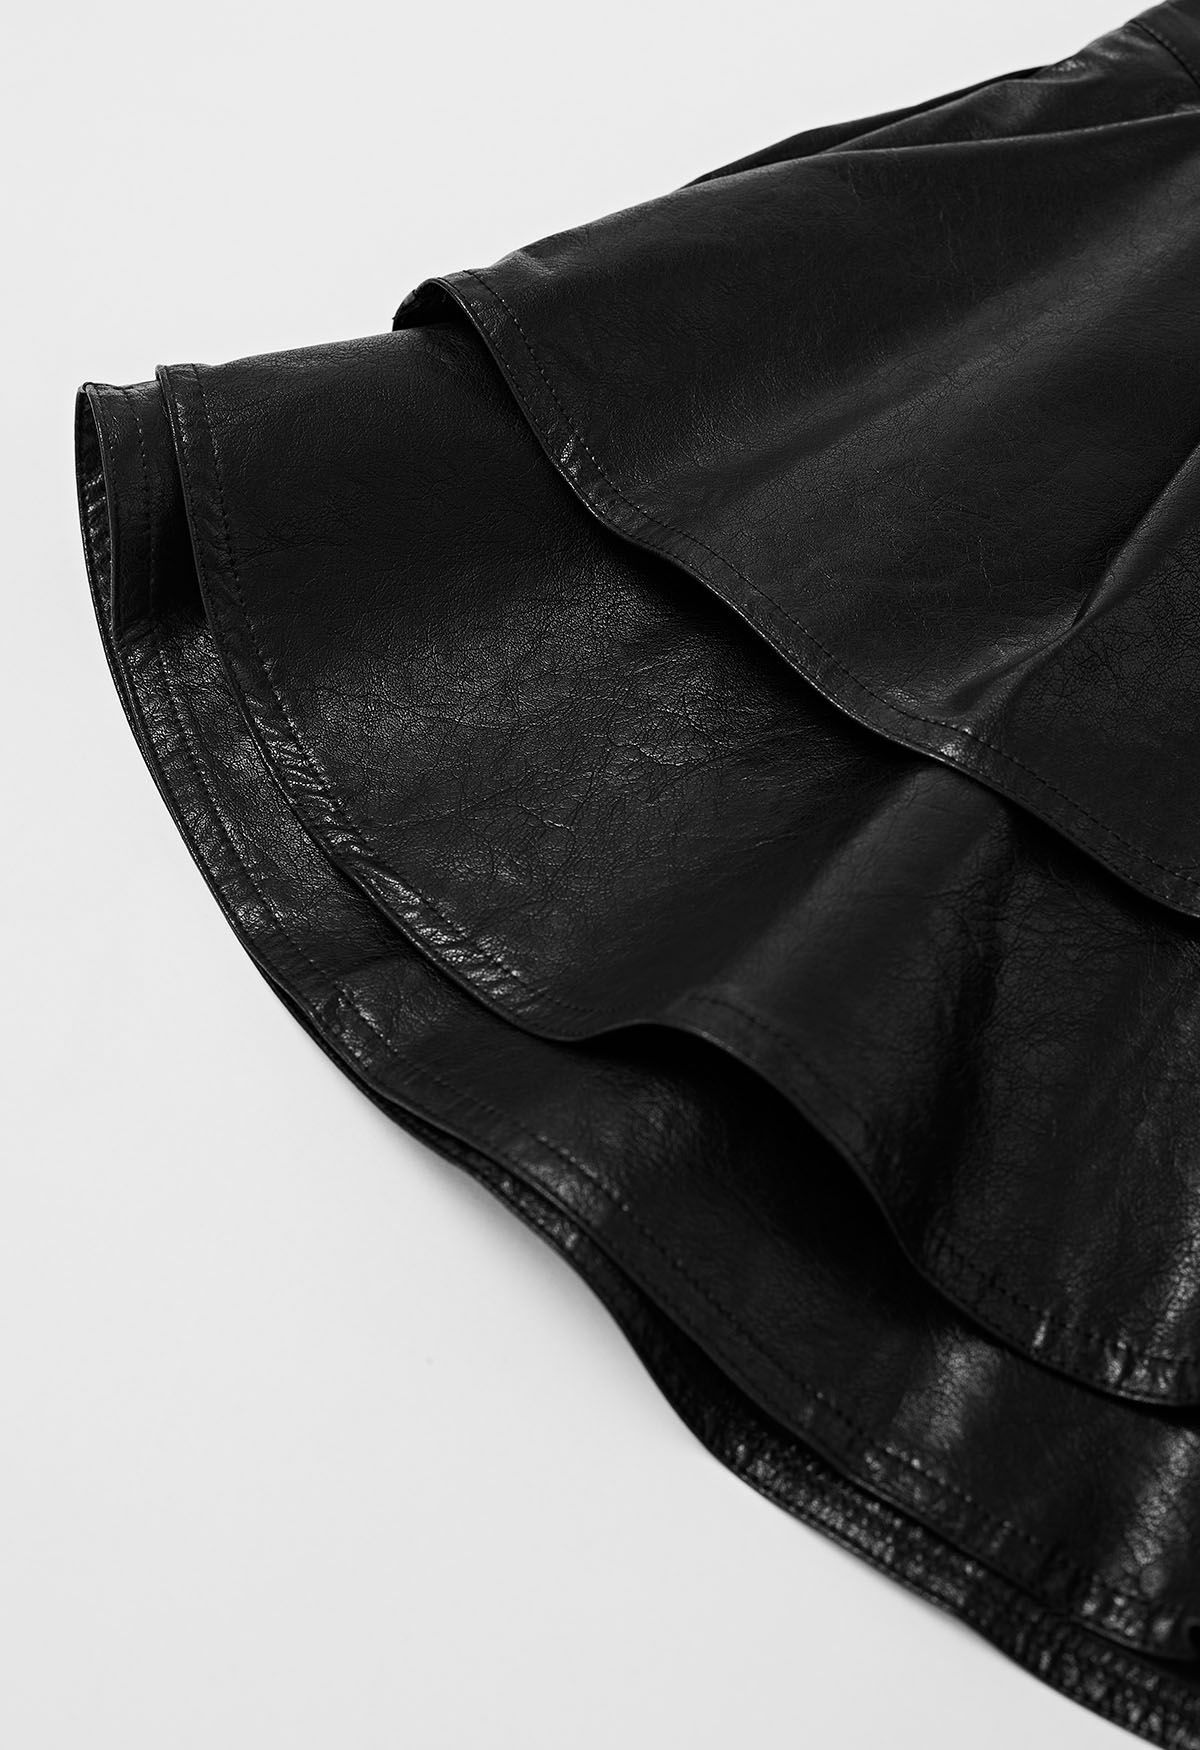 Faux Leather Tiered Ruffle Skorts in Black